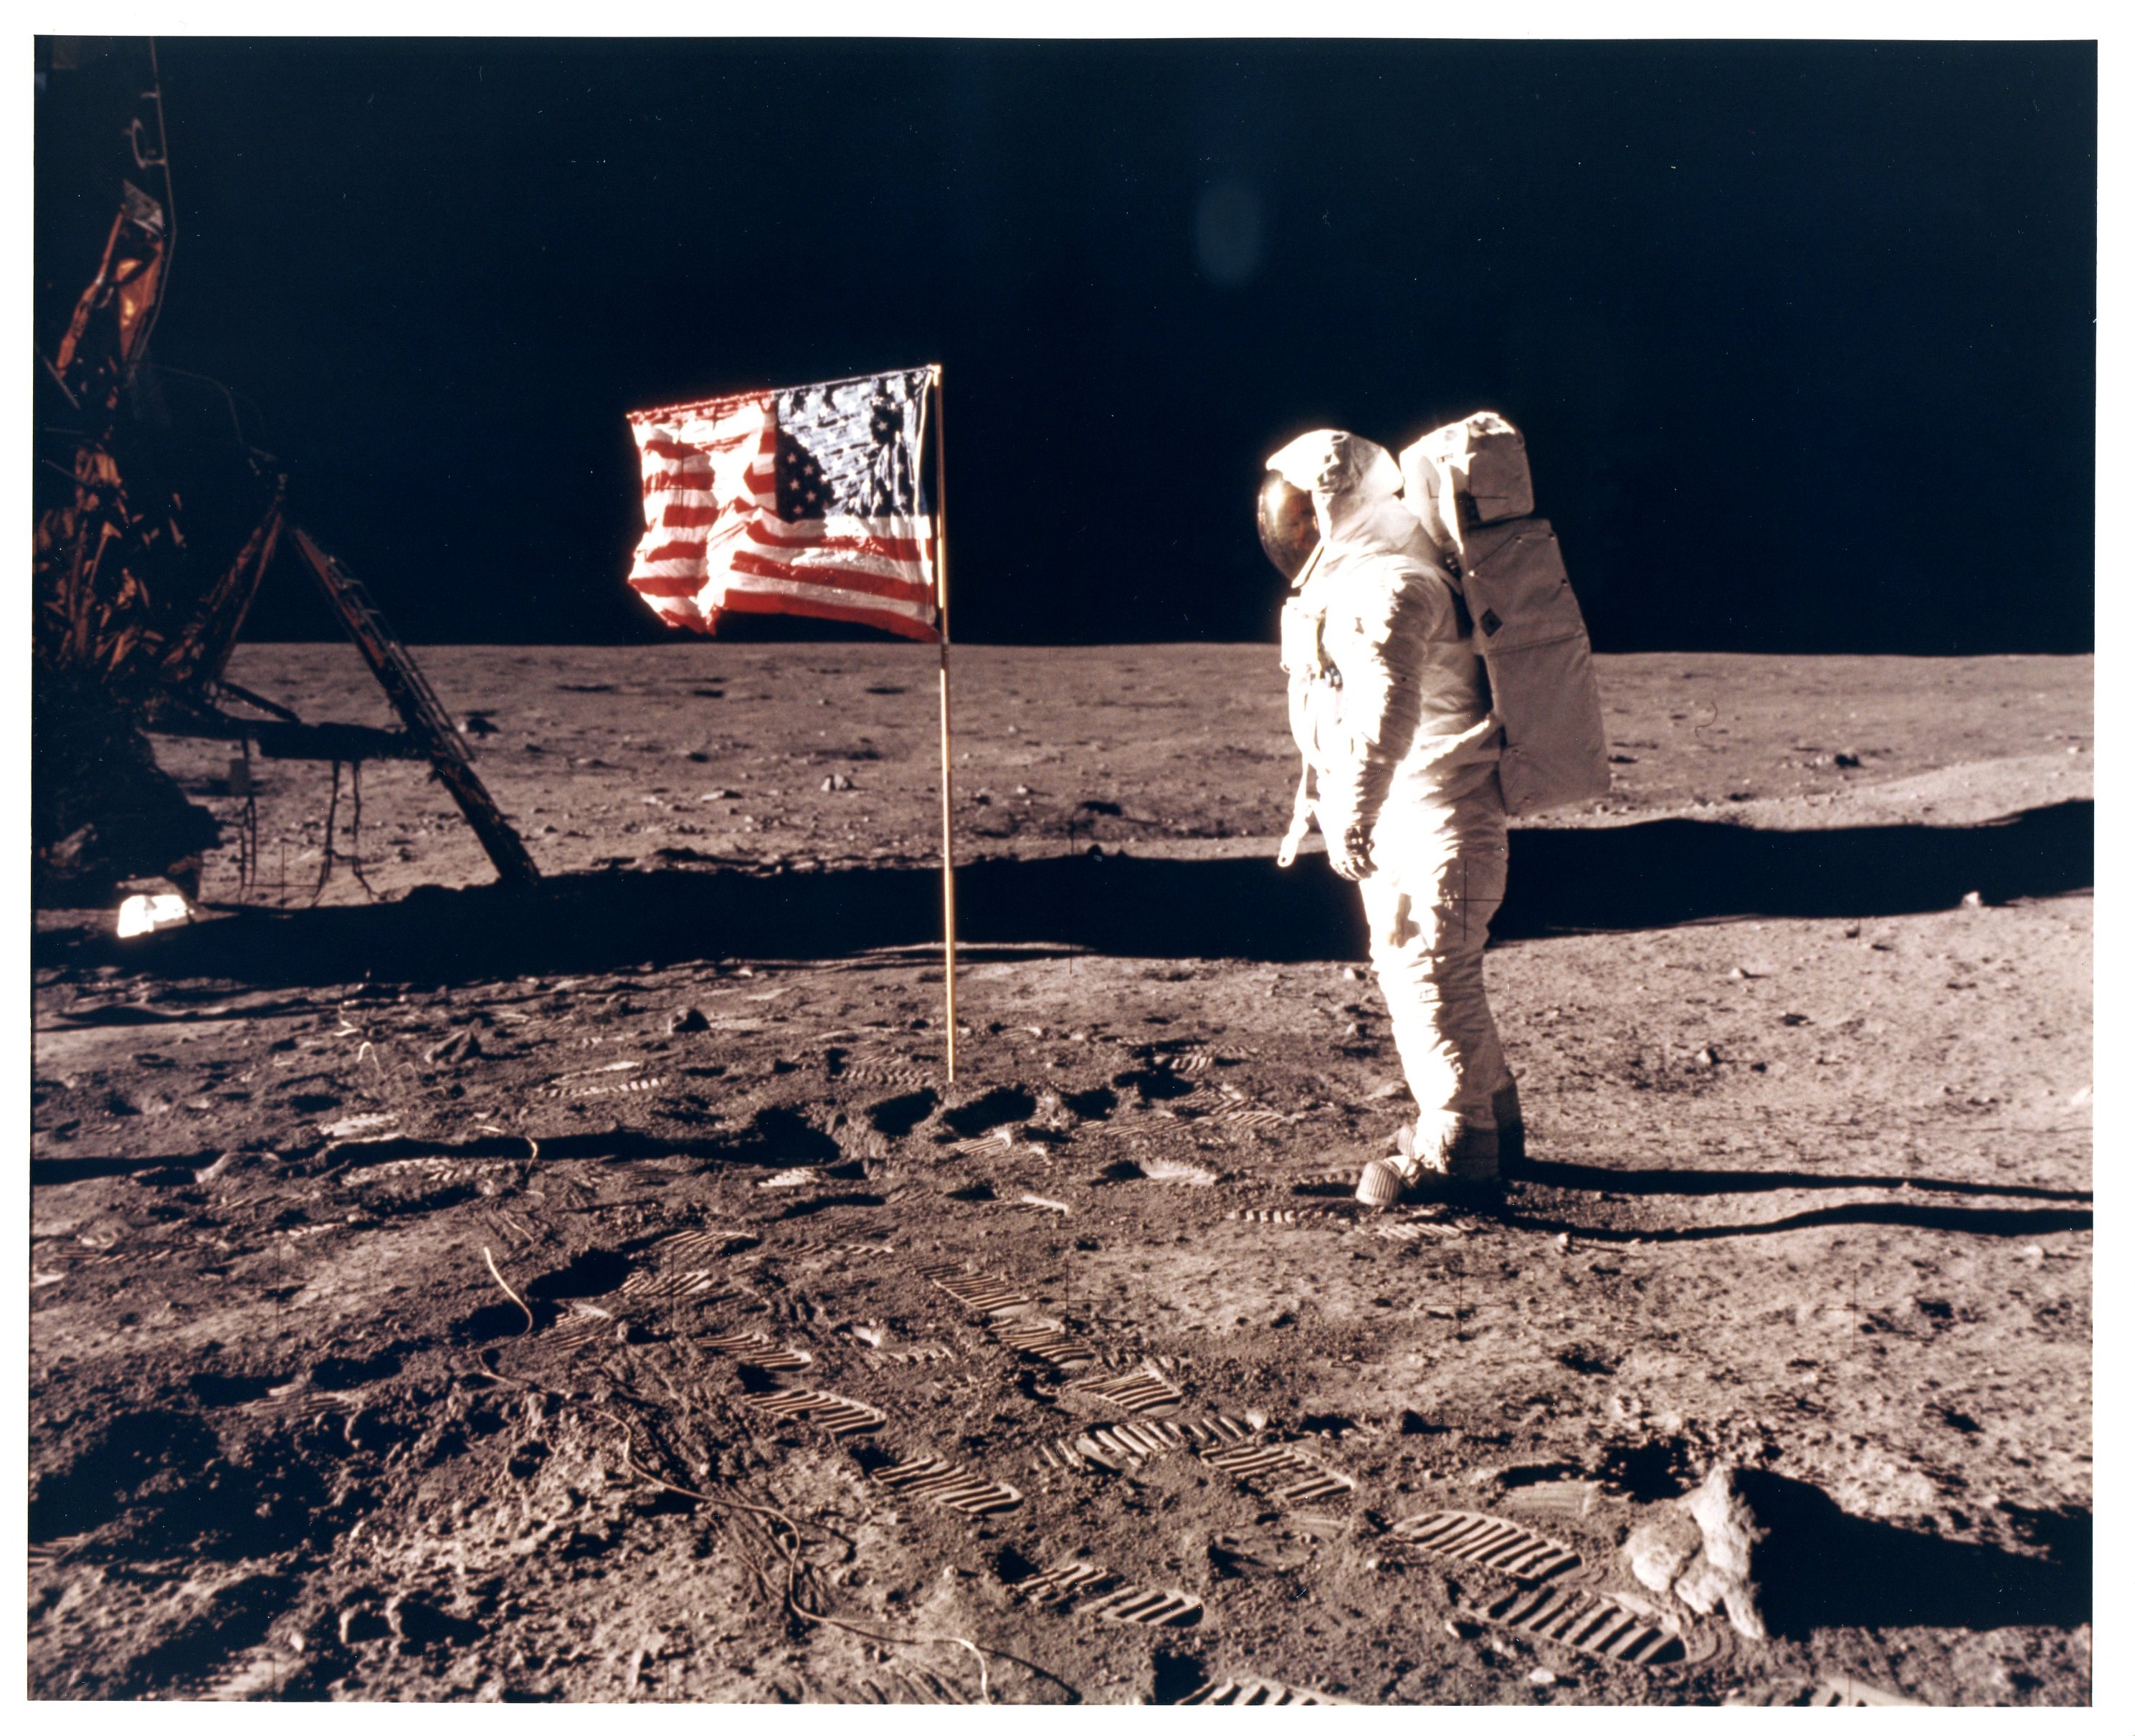 Apollo 11, Buzz Aldrin with the flag of the United States (AS11-40-5880), 1969